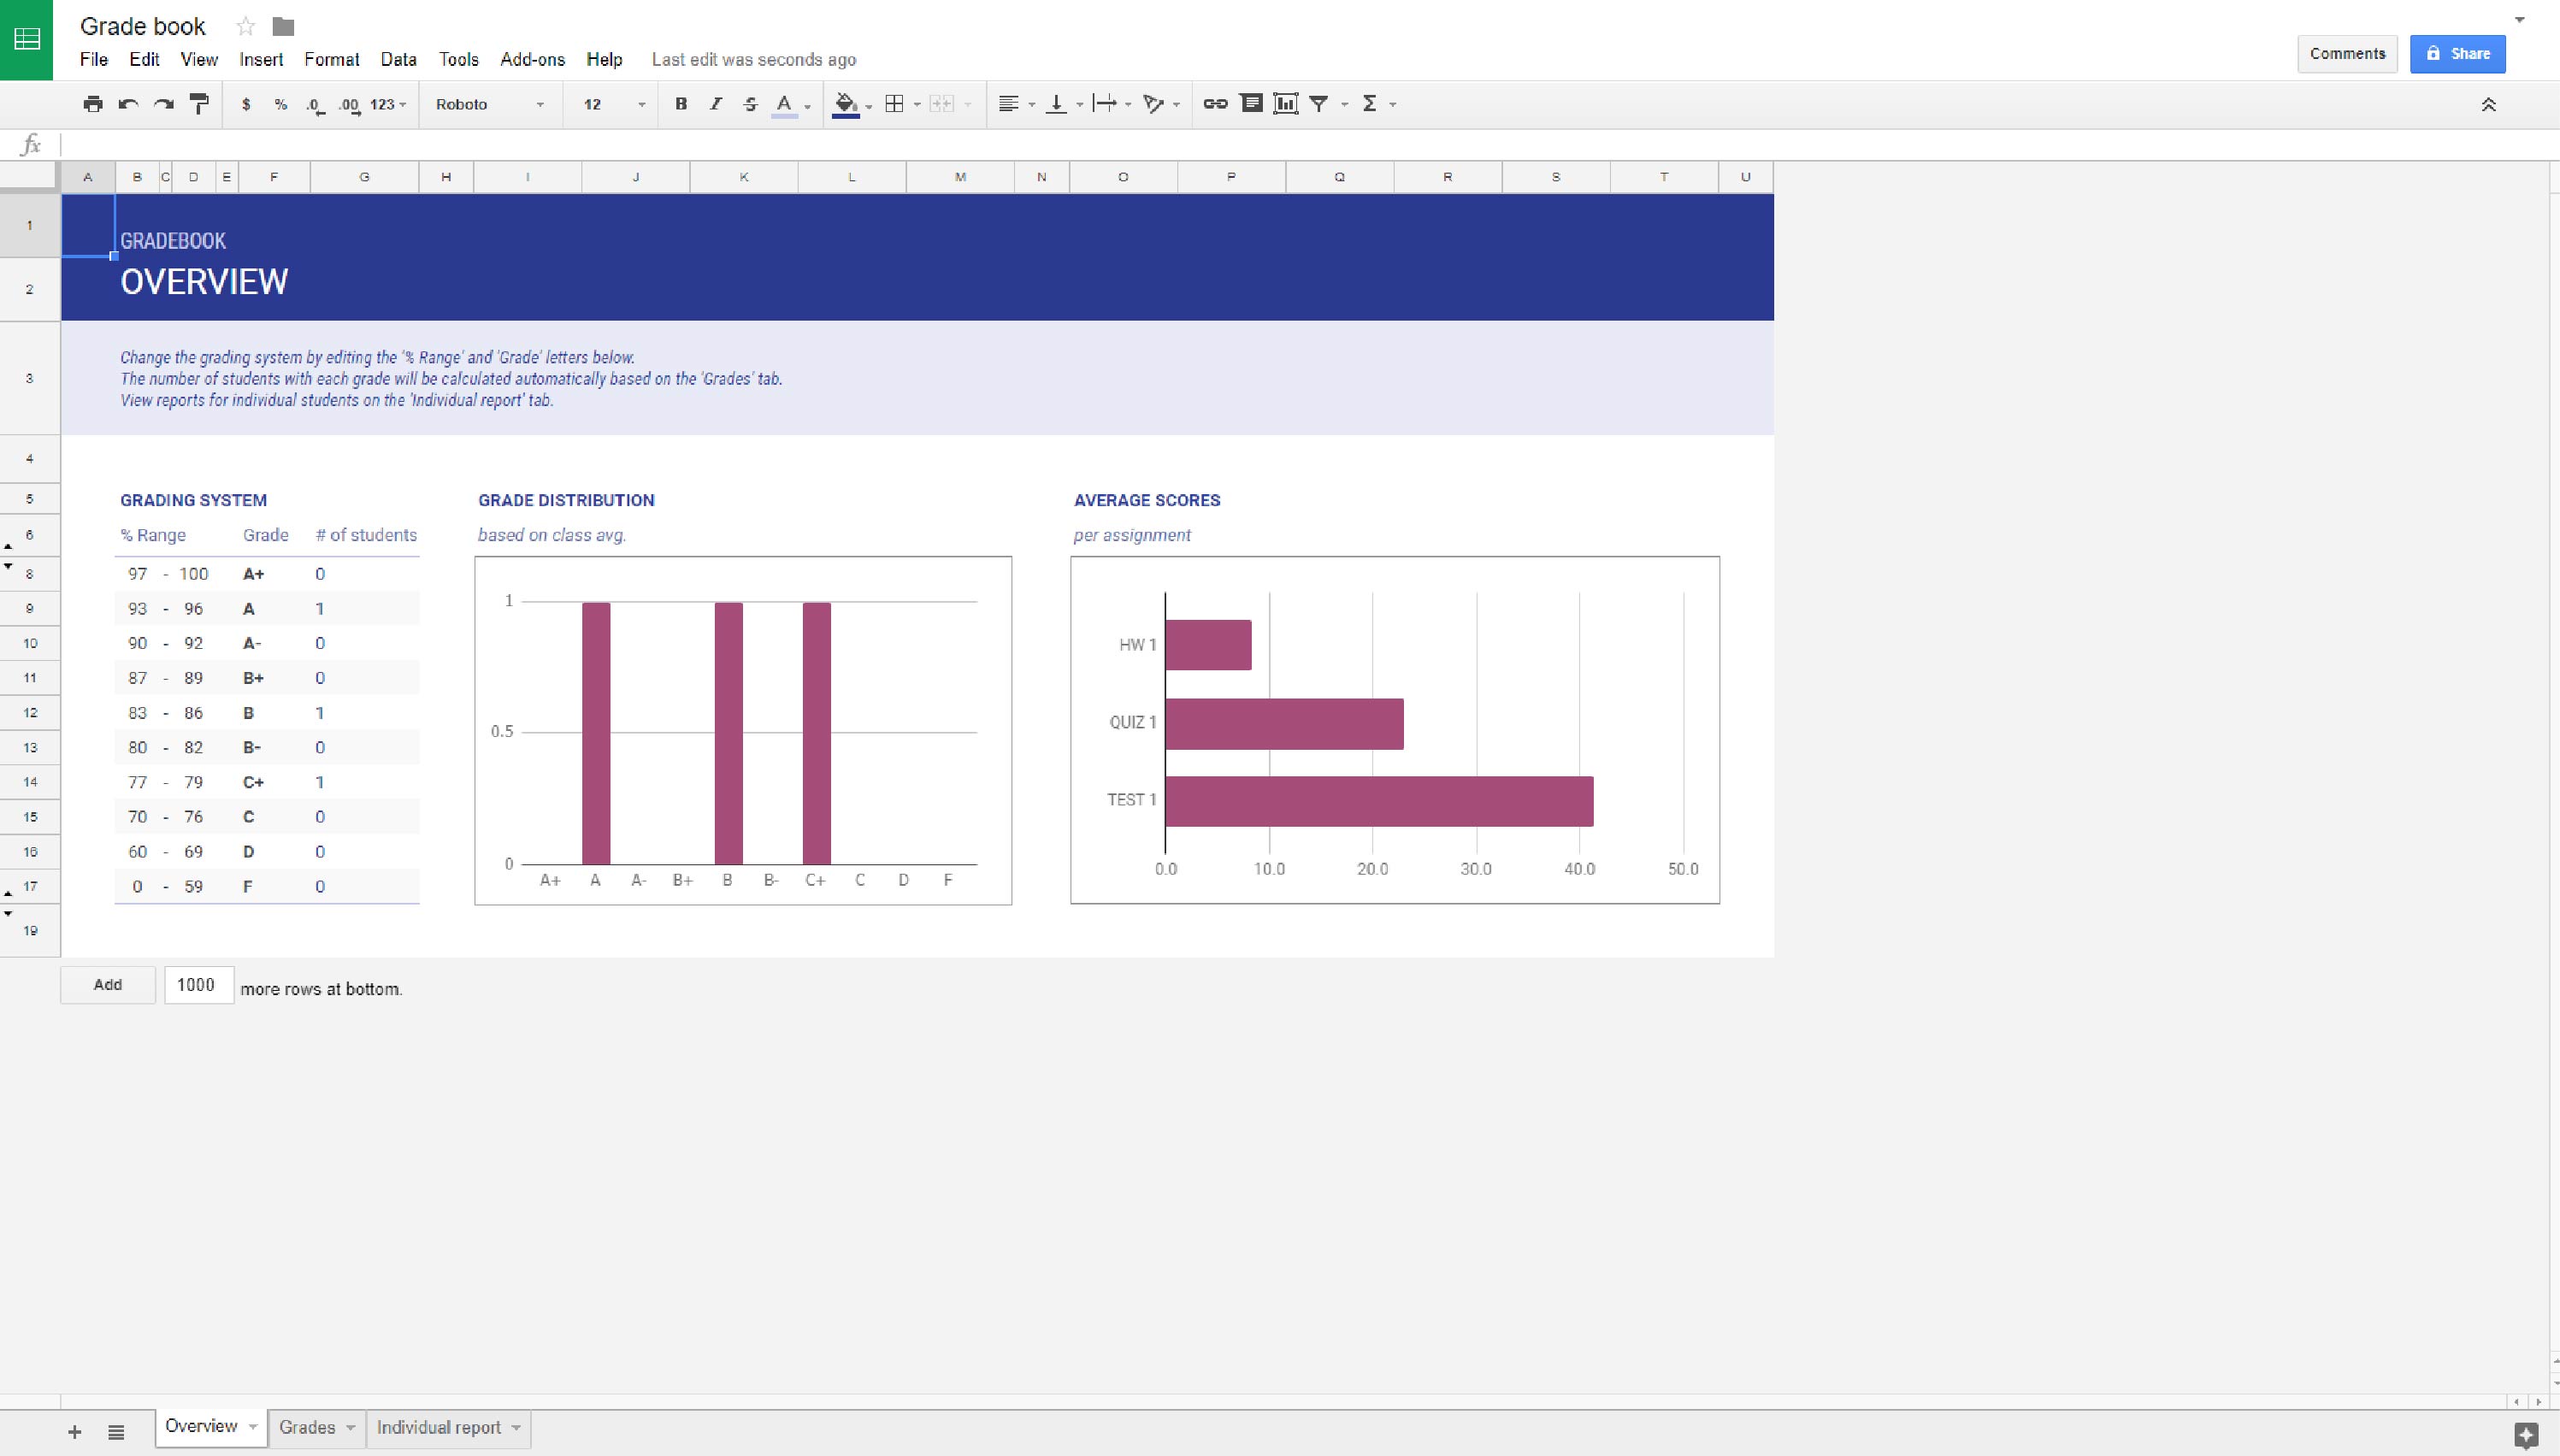 Image of charts and graphs generated from gradebook data in Google Sheets.